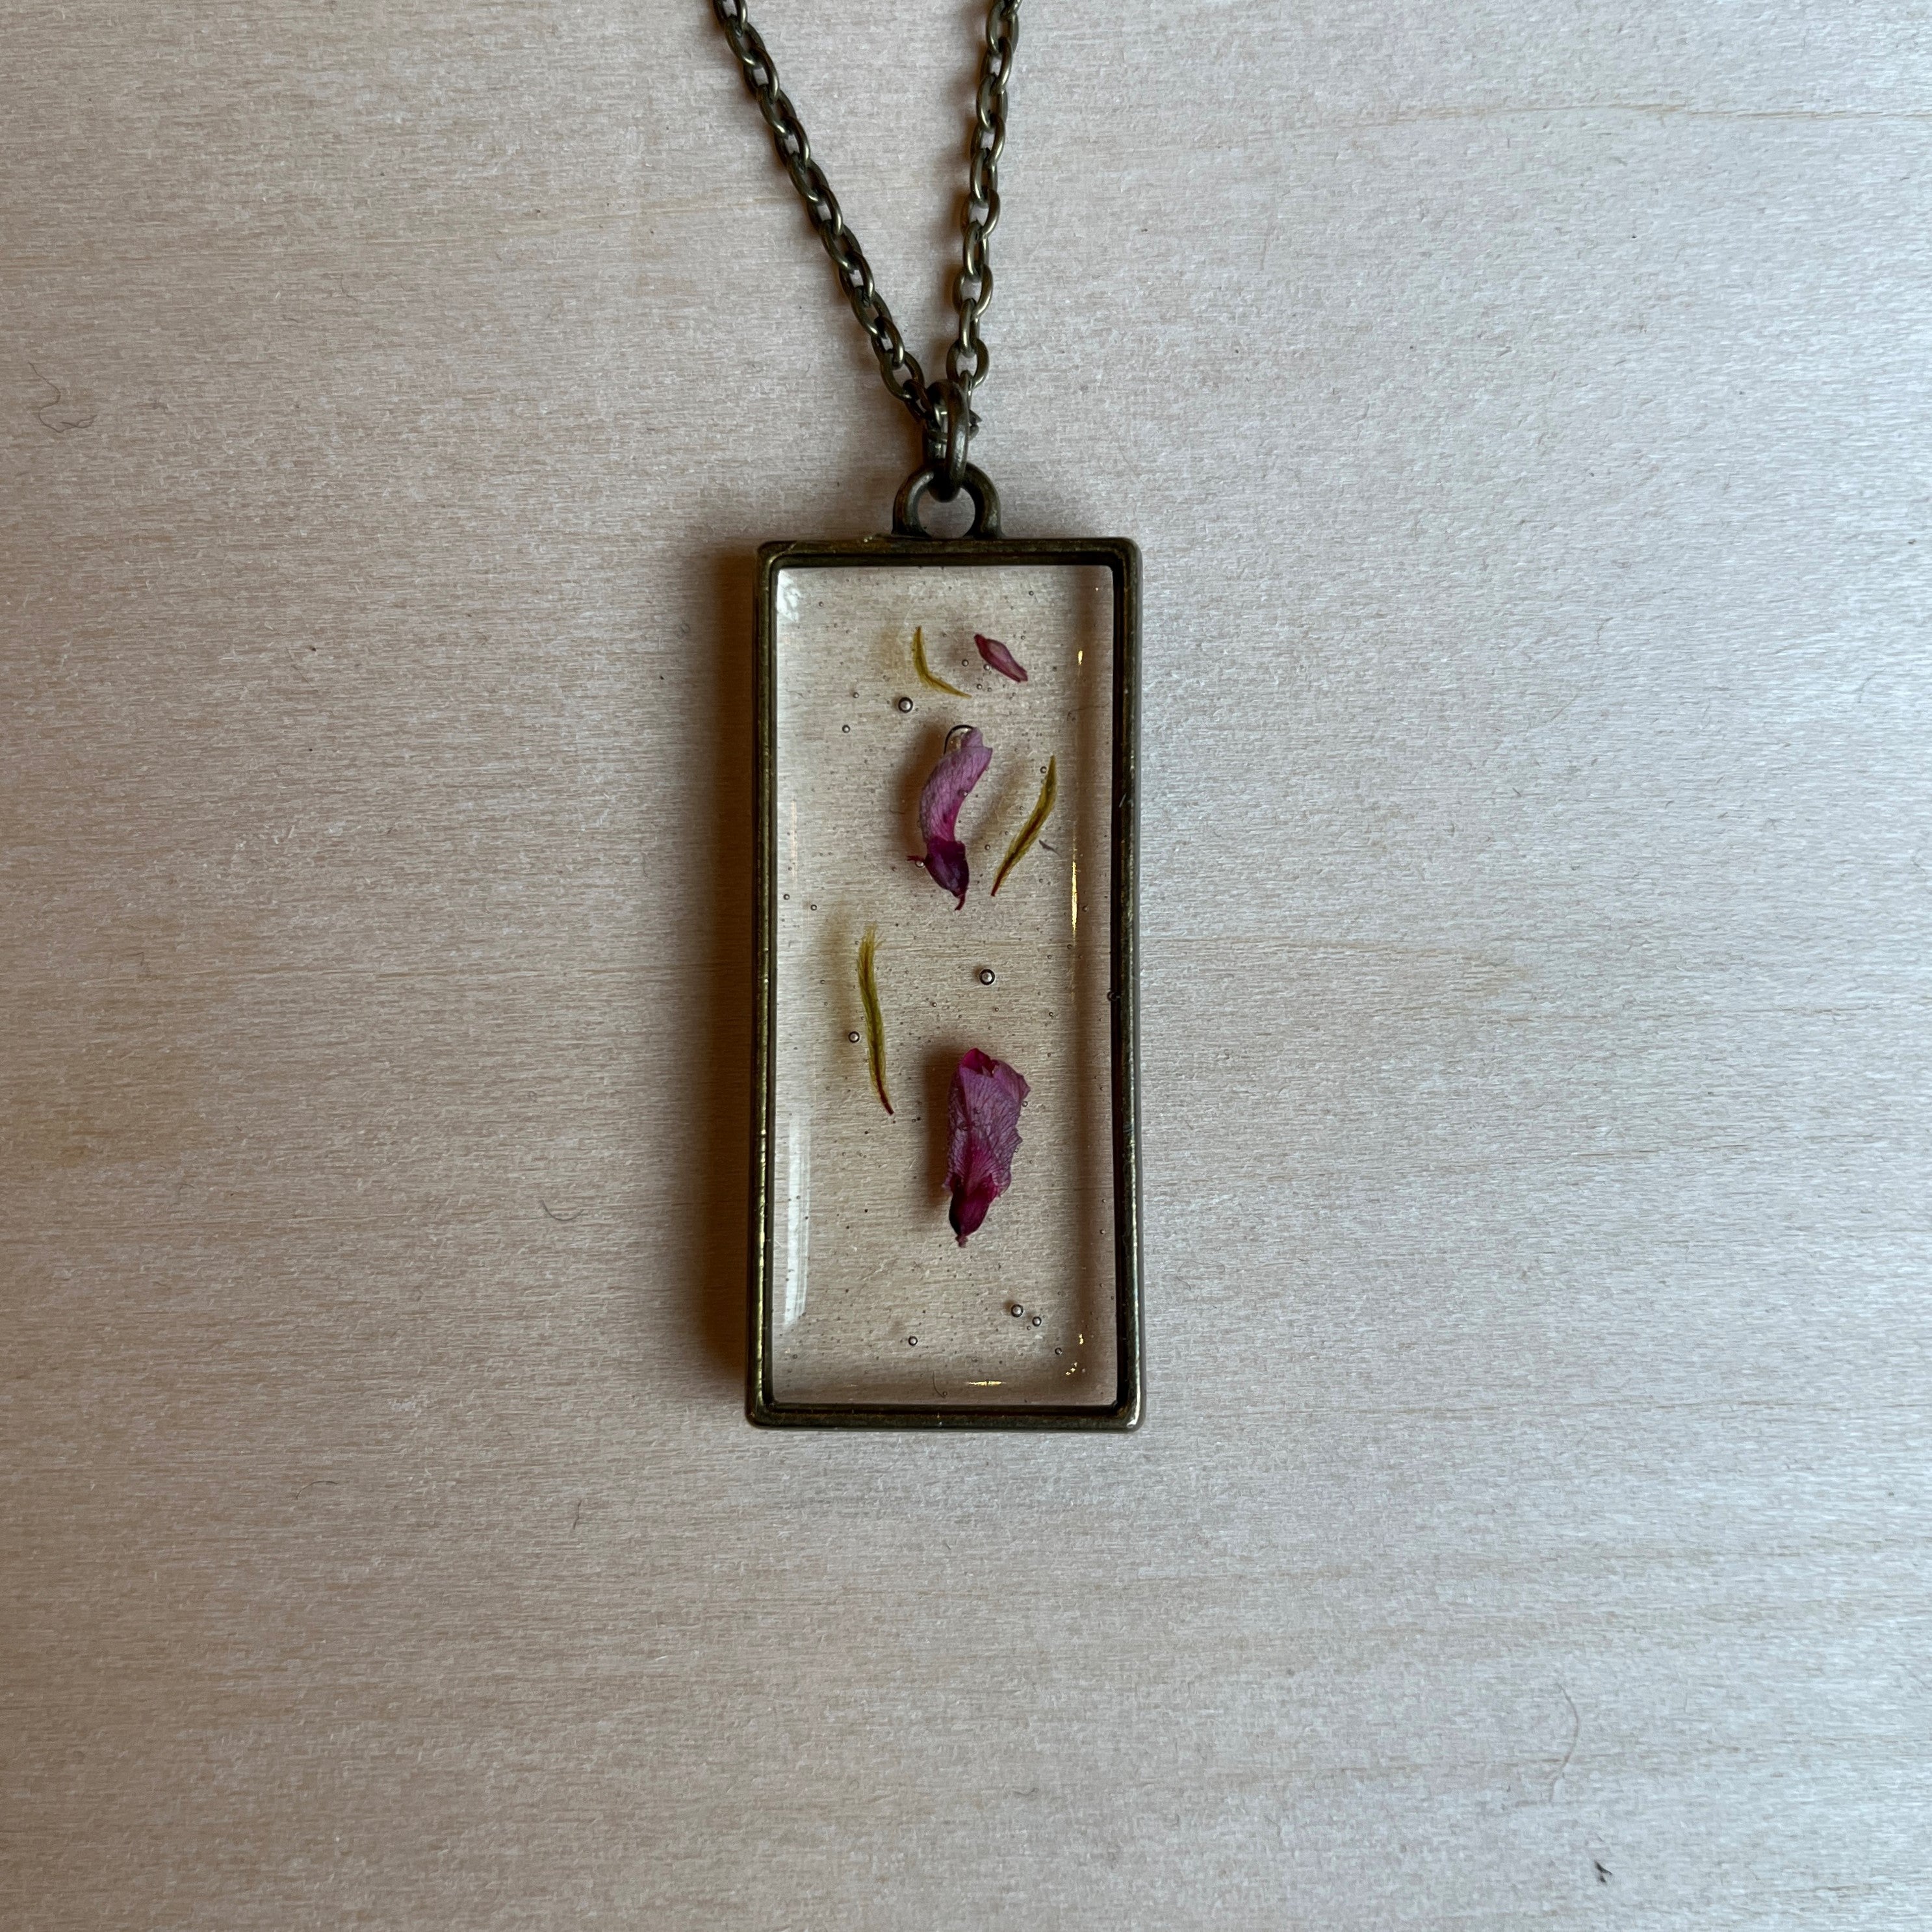 Eastern Red Bud  Flower Resin Necklace